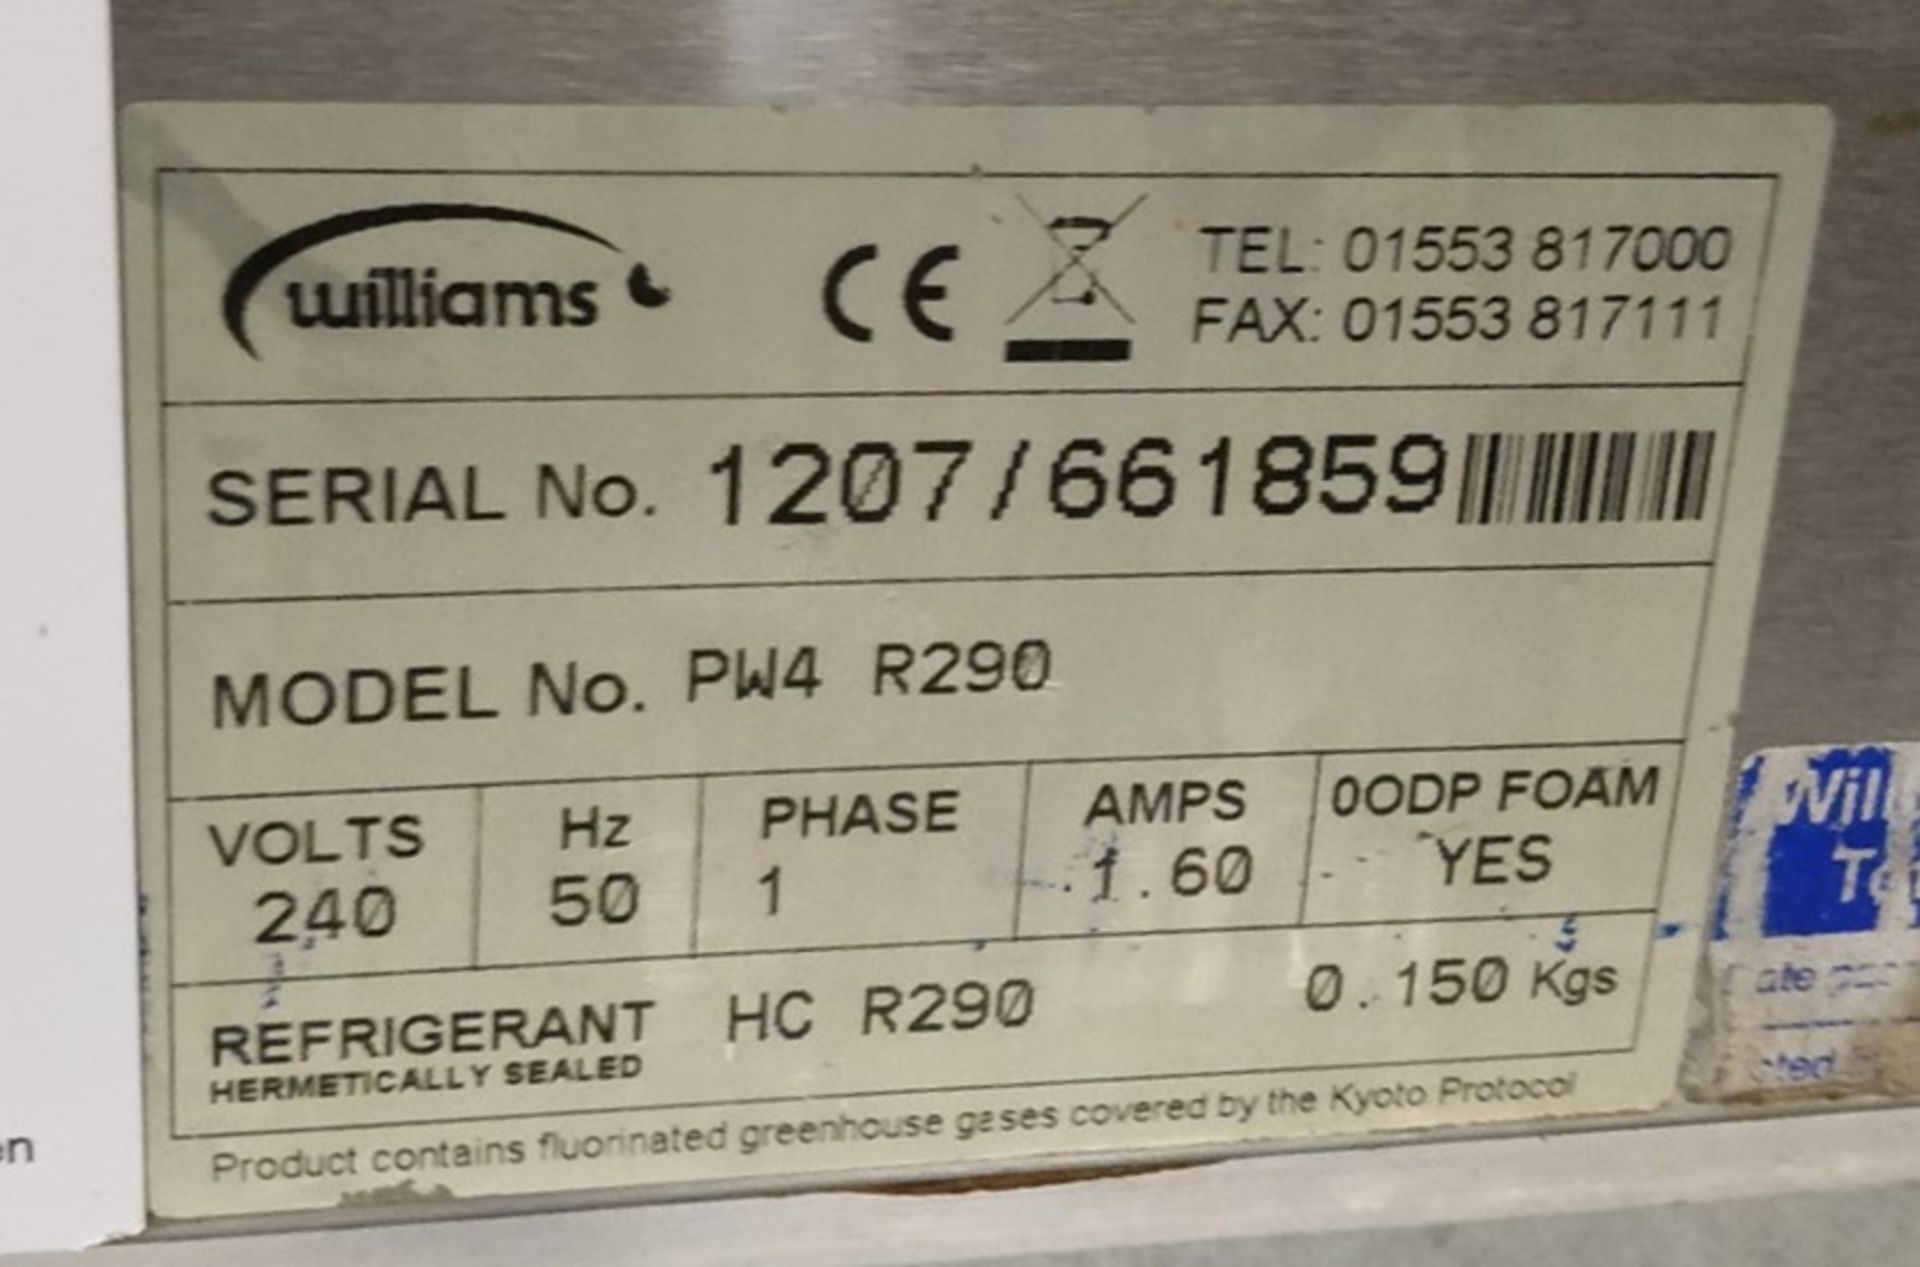 1 x Williams Refrigerated Counter Prep Well With Gastro Pans and Stainless Steel Finish - 240v UK - Image 4 of 6